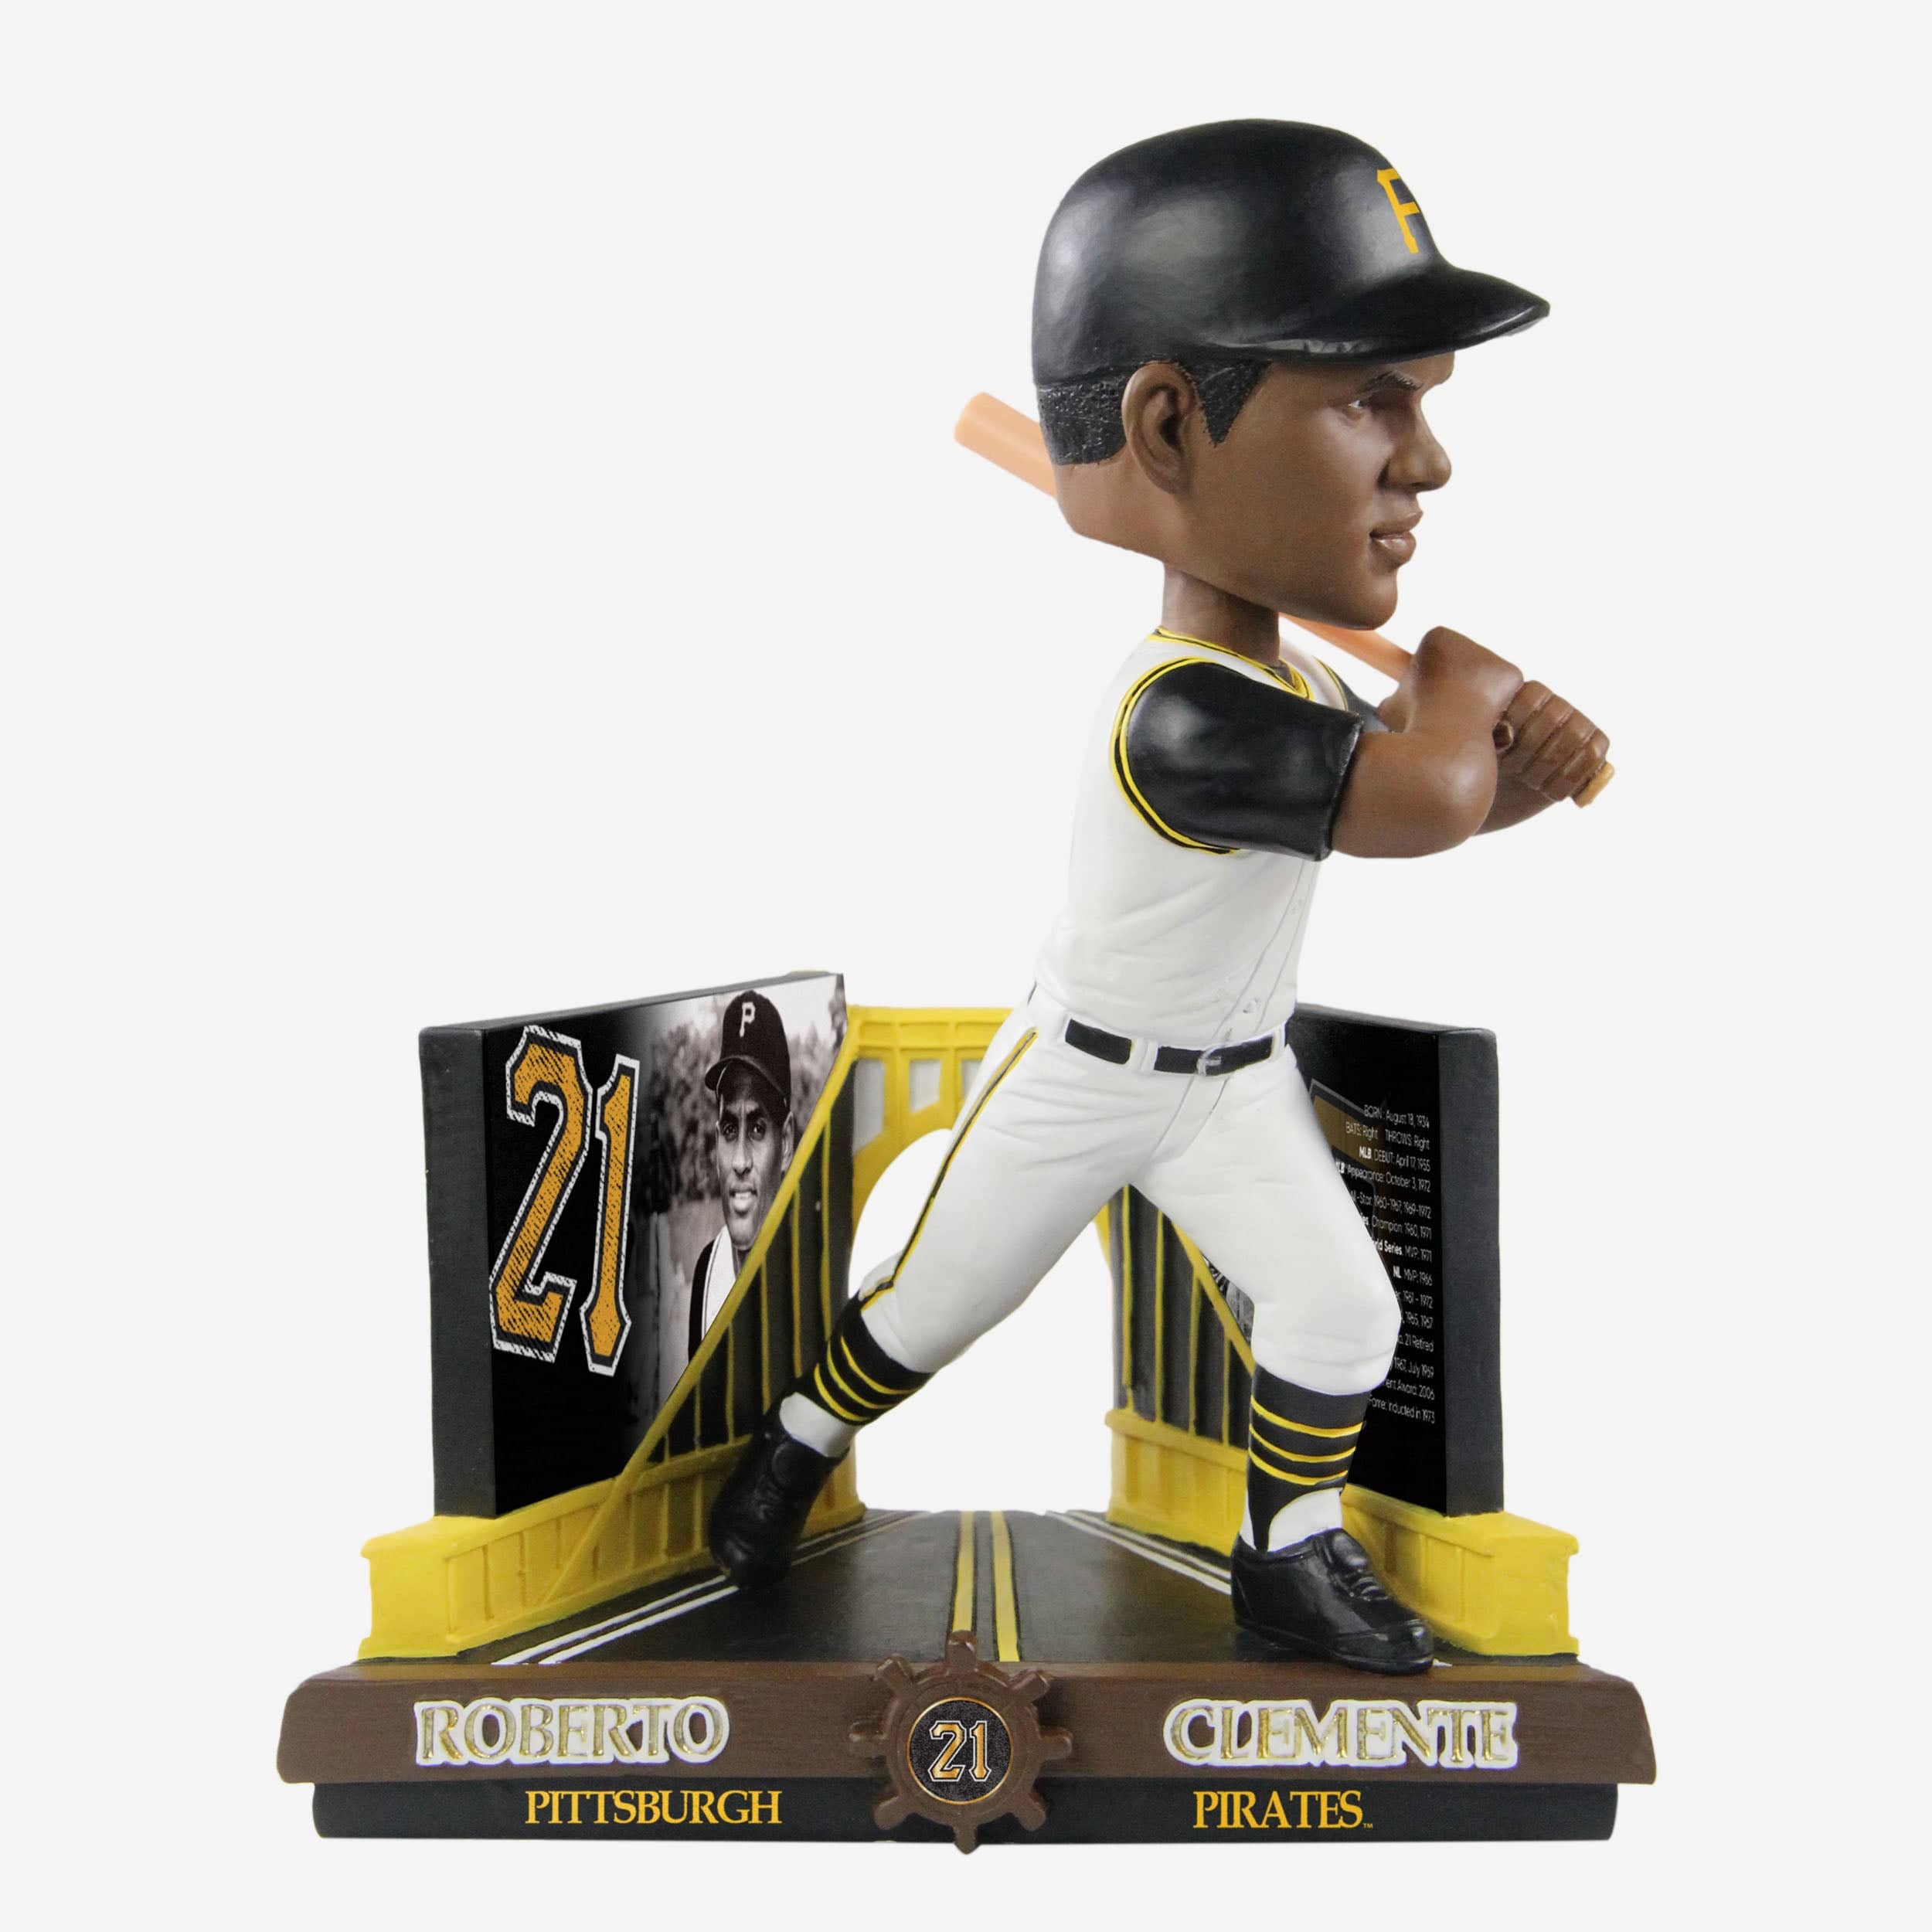 FOCO Releases Bobbleheads, Embroidered Bear For Roberto Clemente Day